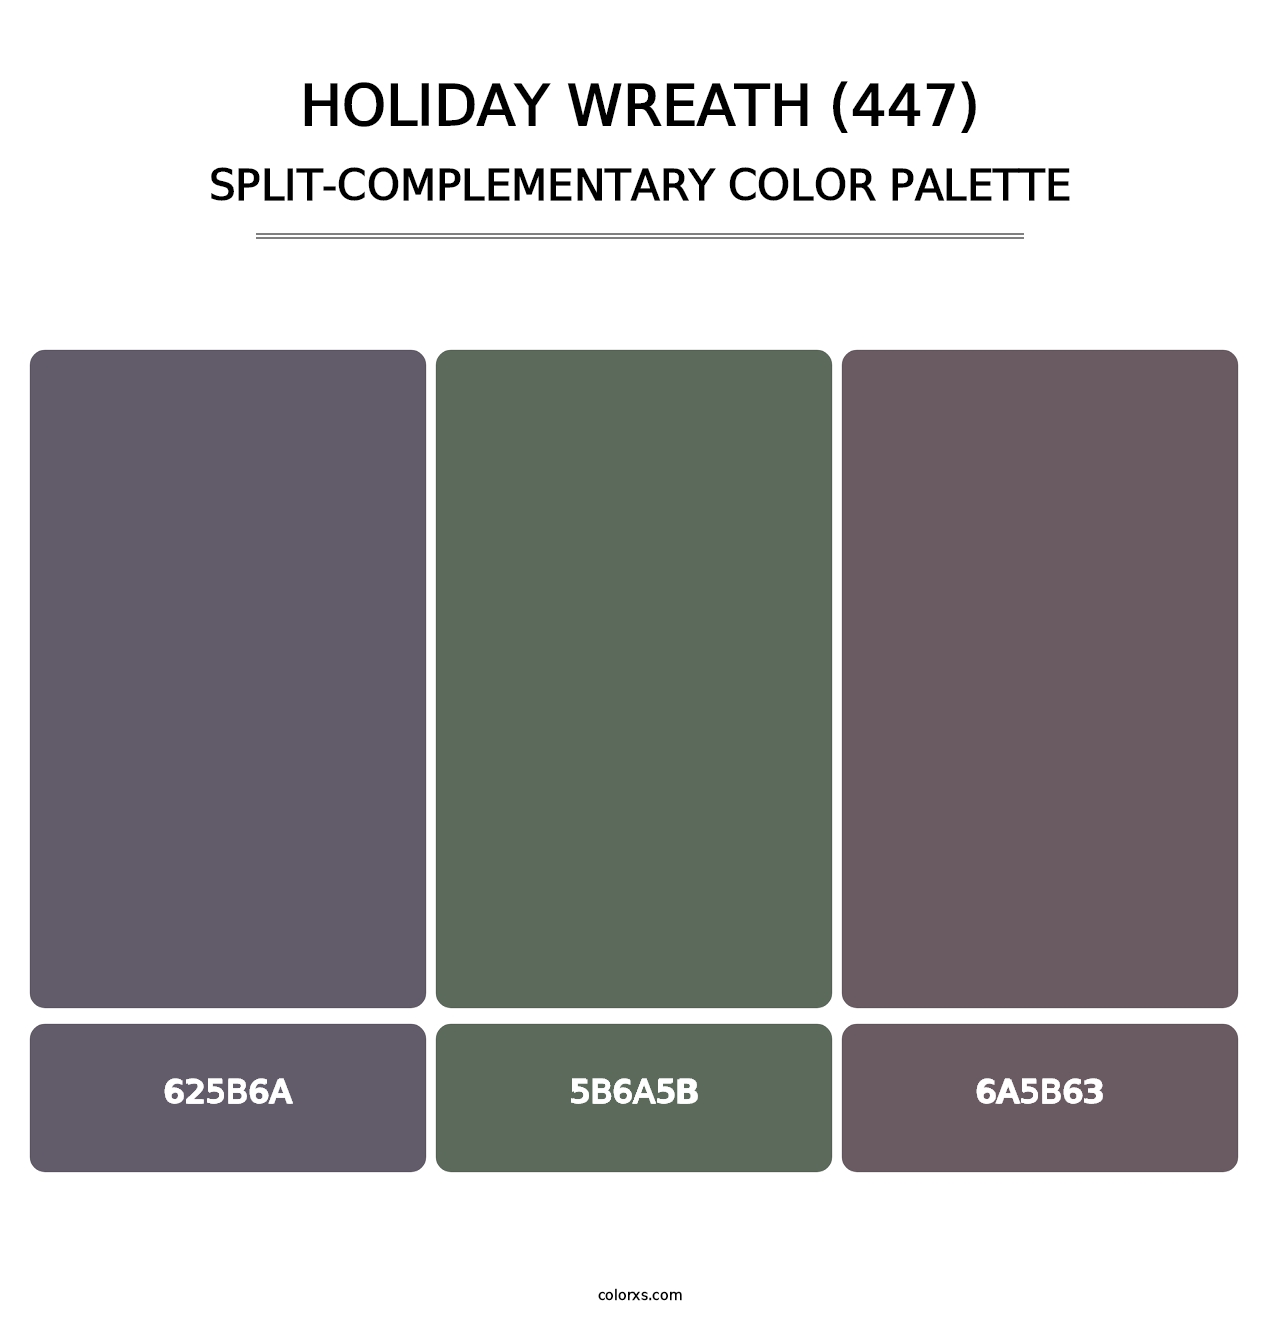 Holiday Wreath (447) - Split-Complementary Color Palette